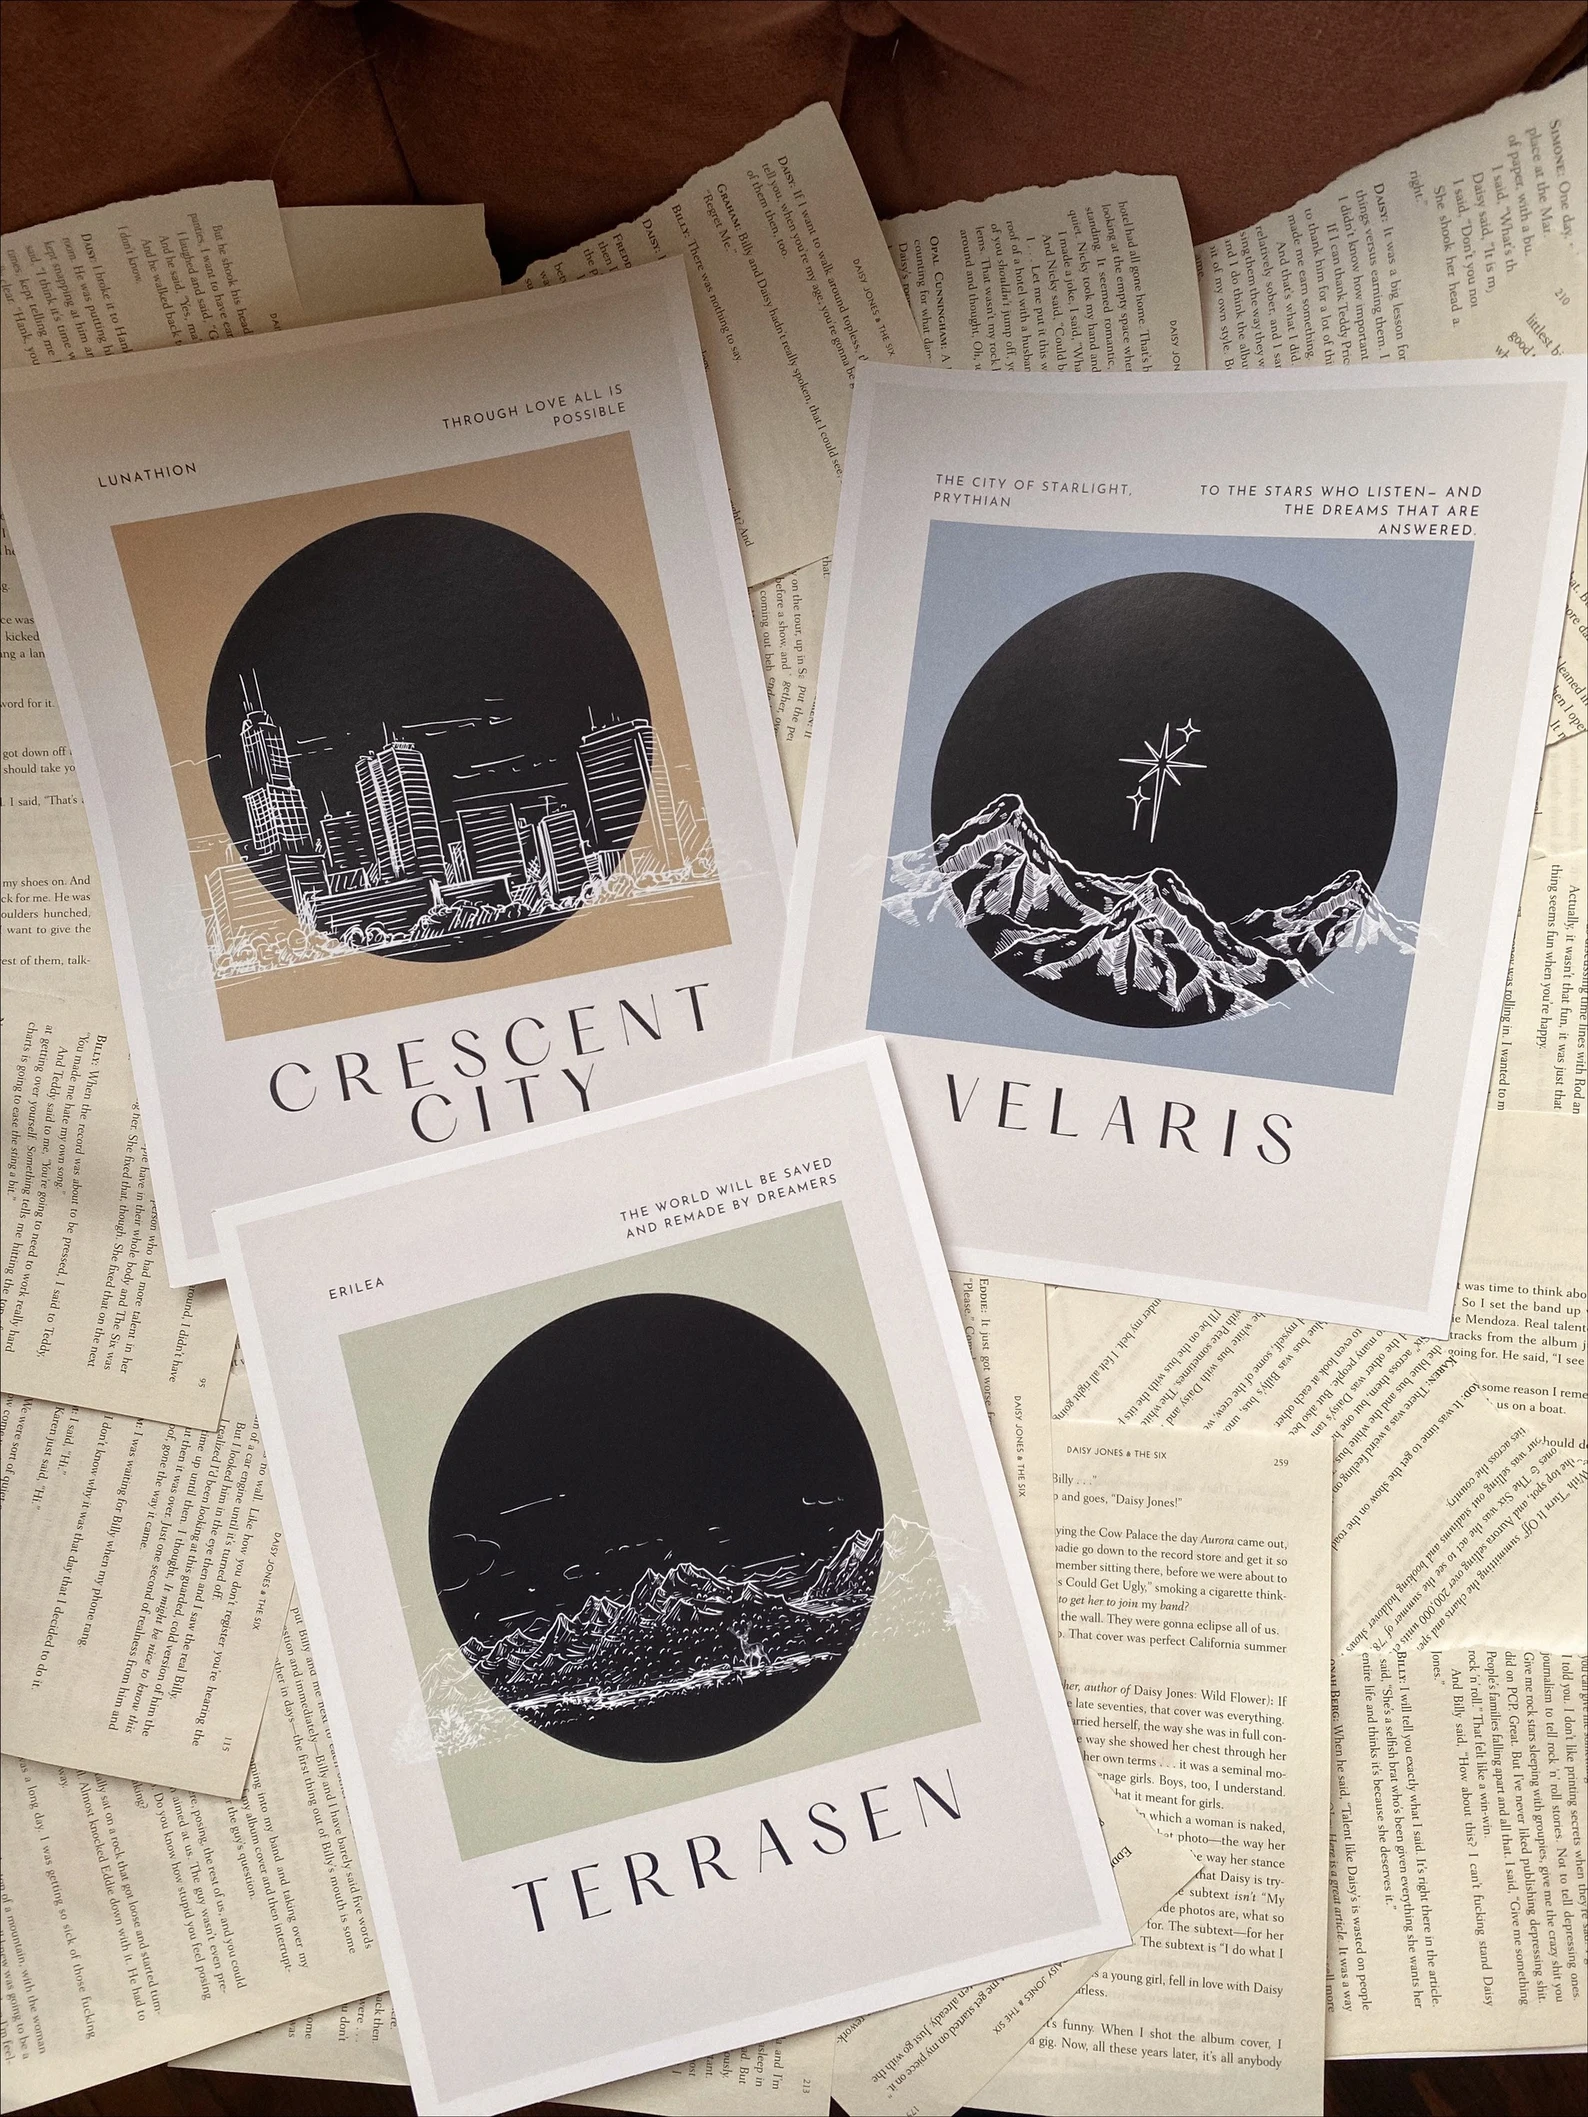 A photo of 3 white postcards. Top to bottom, left to right, the postcards are orange and contain a city scape with the words Crescent City, blue and contain mountains and a star with the words Velaris, and green and contain mountains with the words Terrasen.